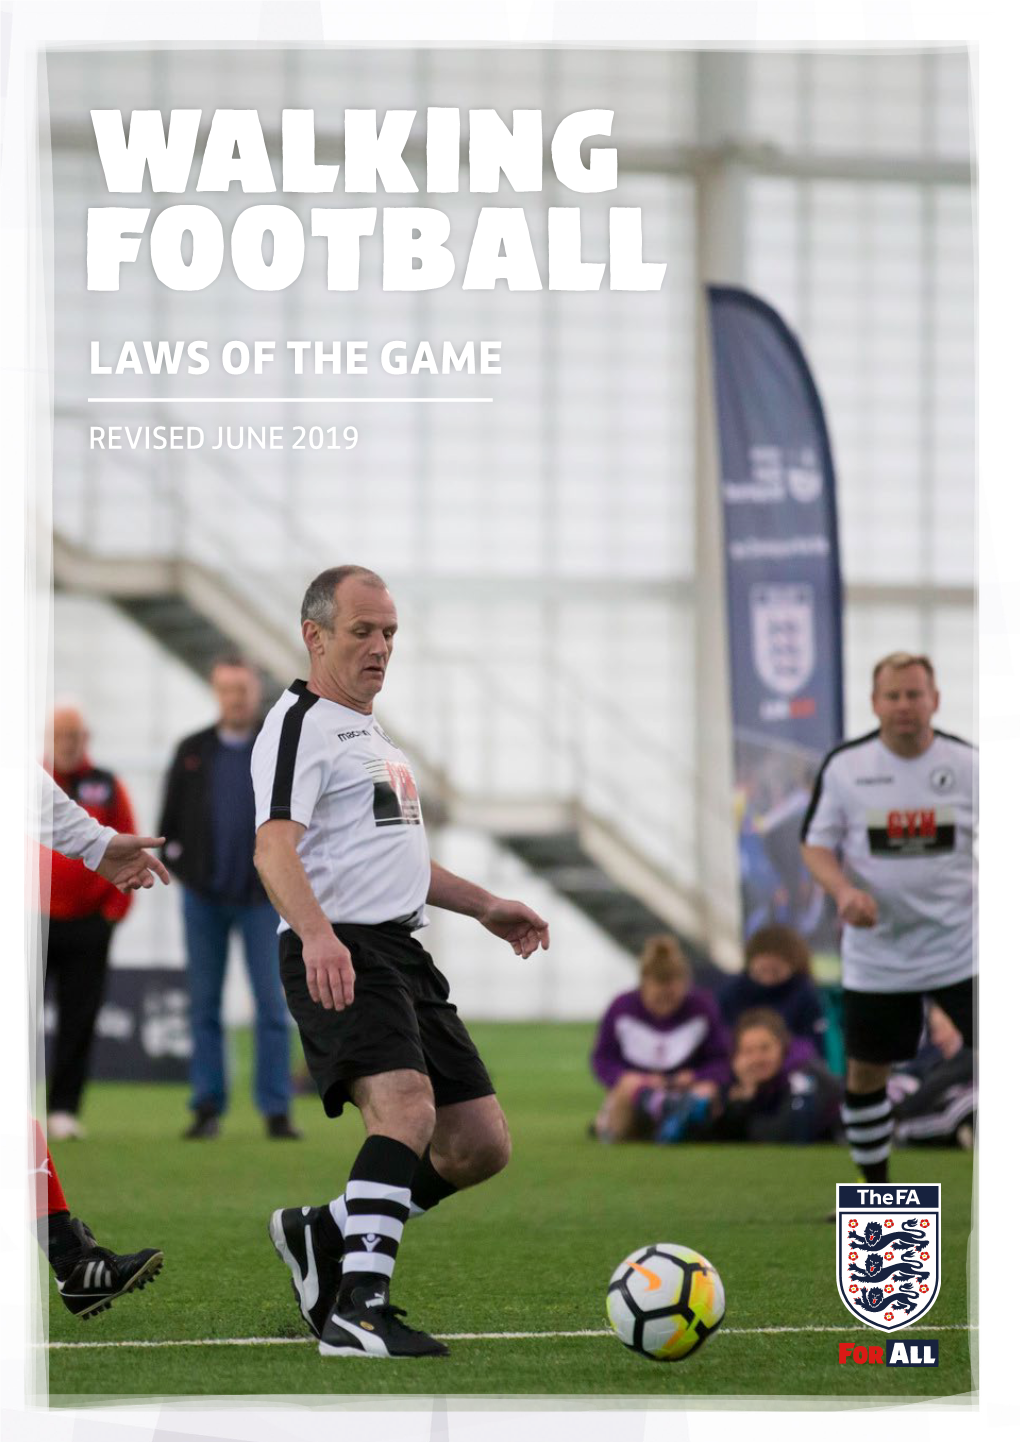 Walking Football Laws of the Game